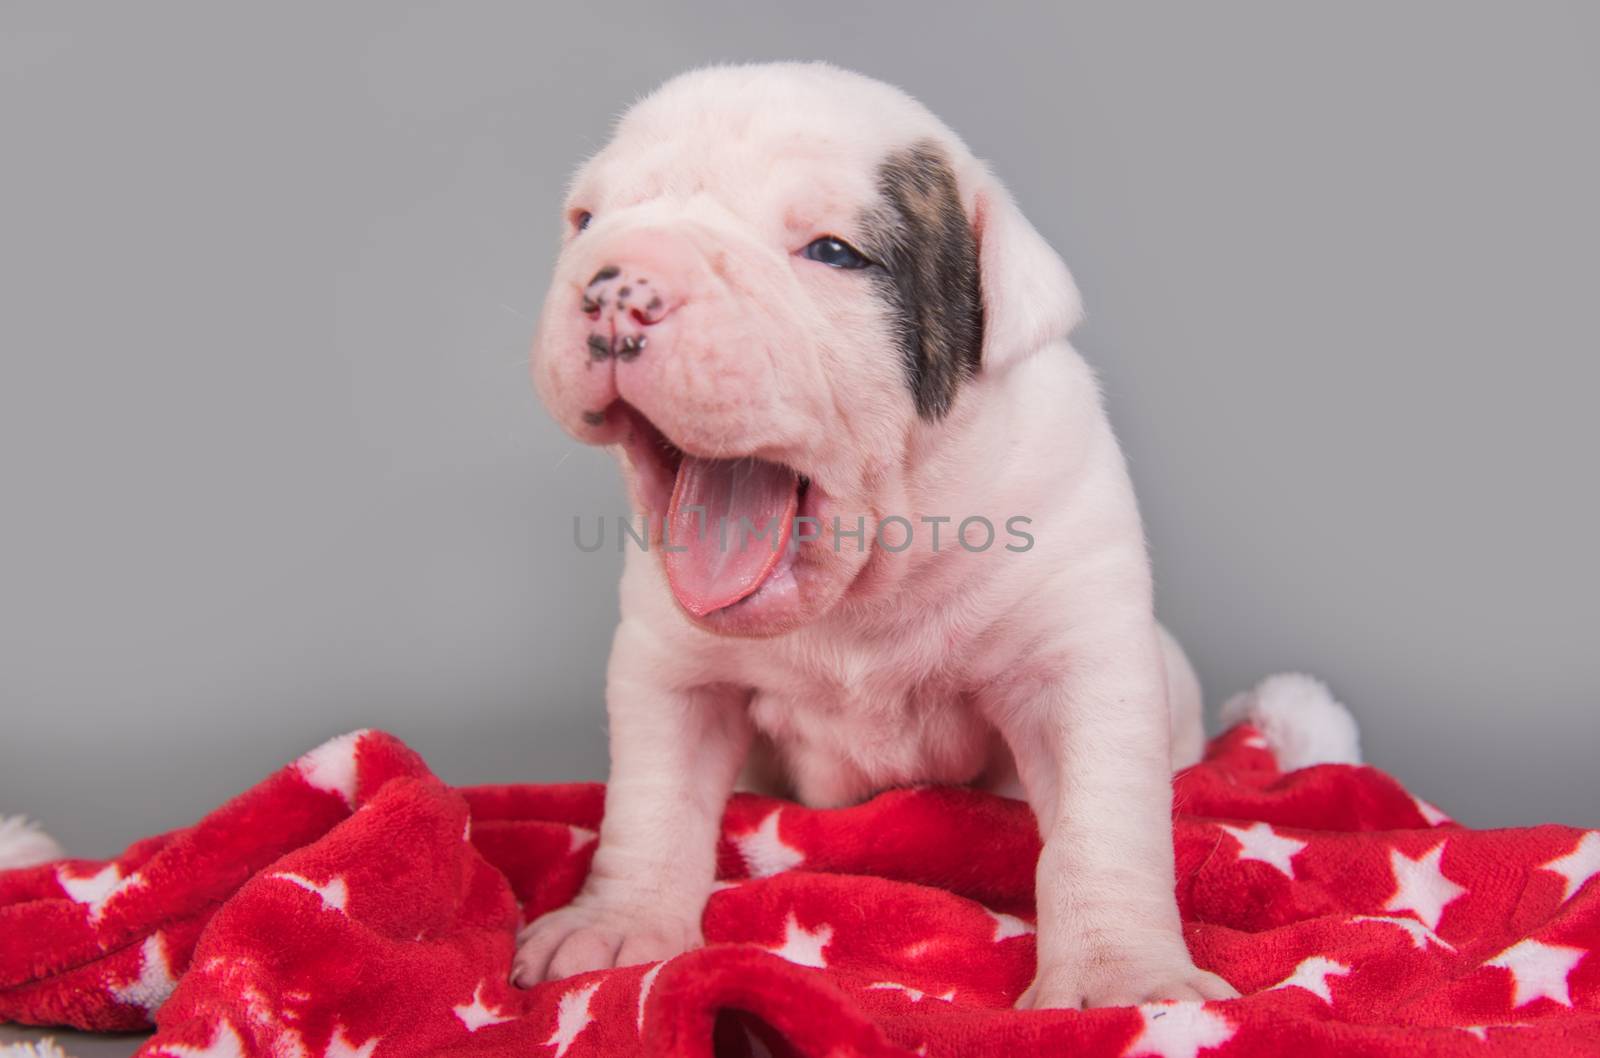 Funny small American Bulldog puppy dog is yawning on gray red with white stars background.